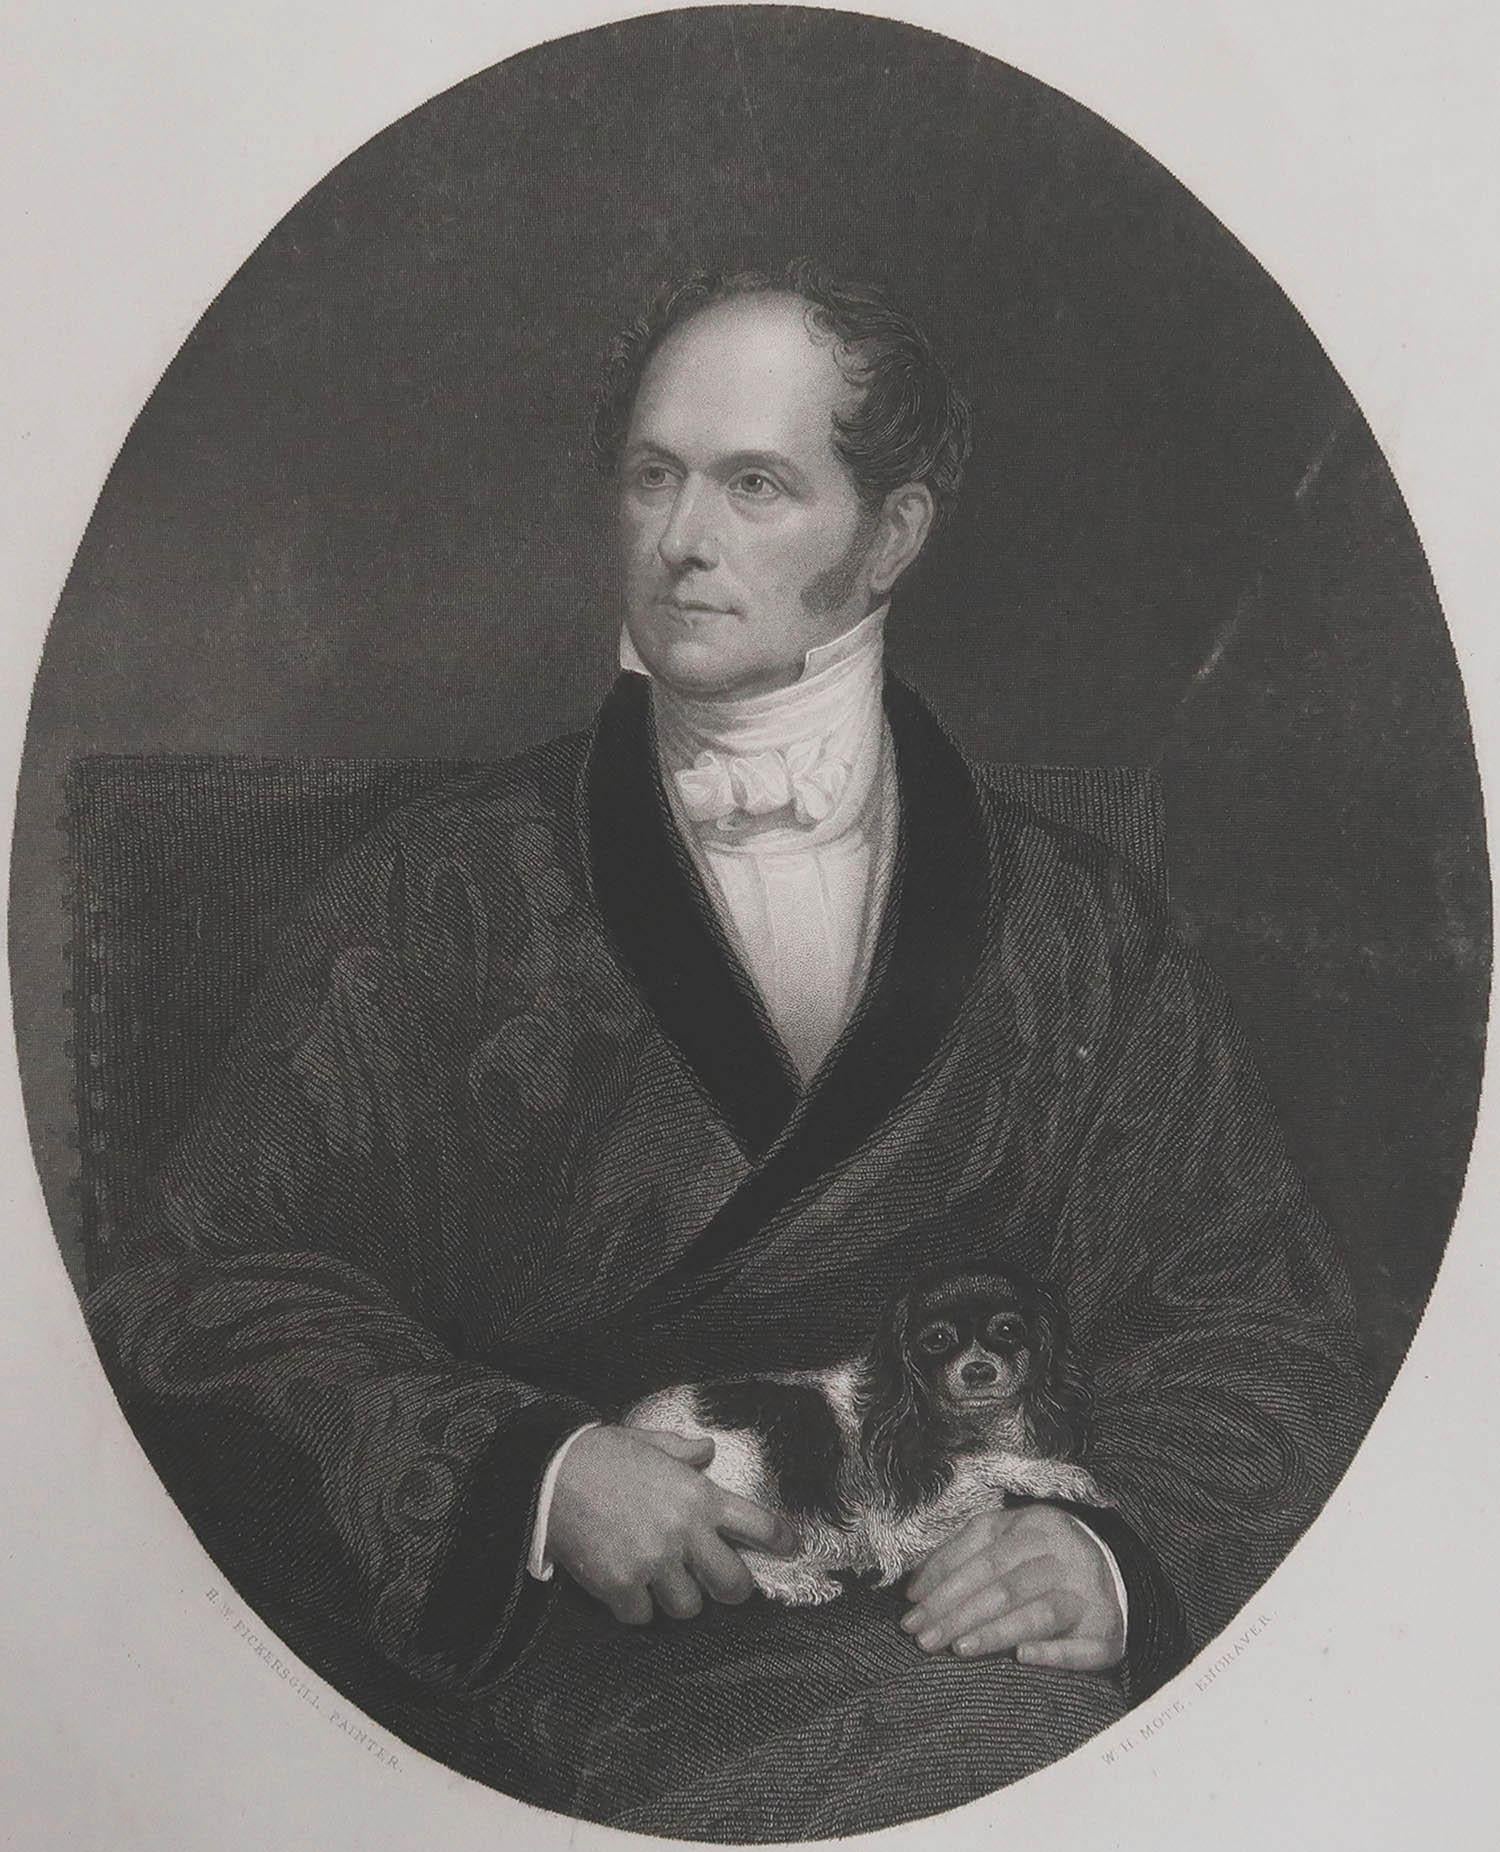 Wonderful image of A Gentleman holding a King Charles Spaniel

Fine steel engraving after H.W Pickersgill

Published circa 1850

Unframed.

